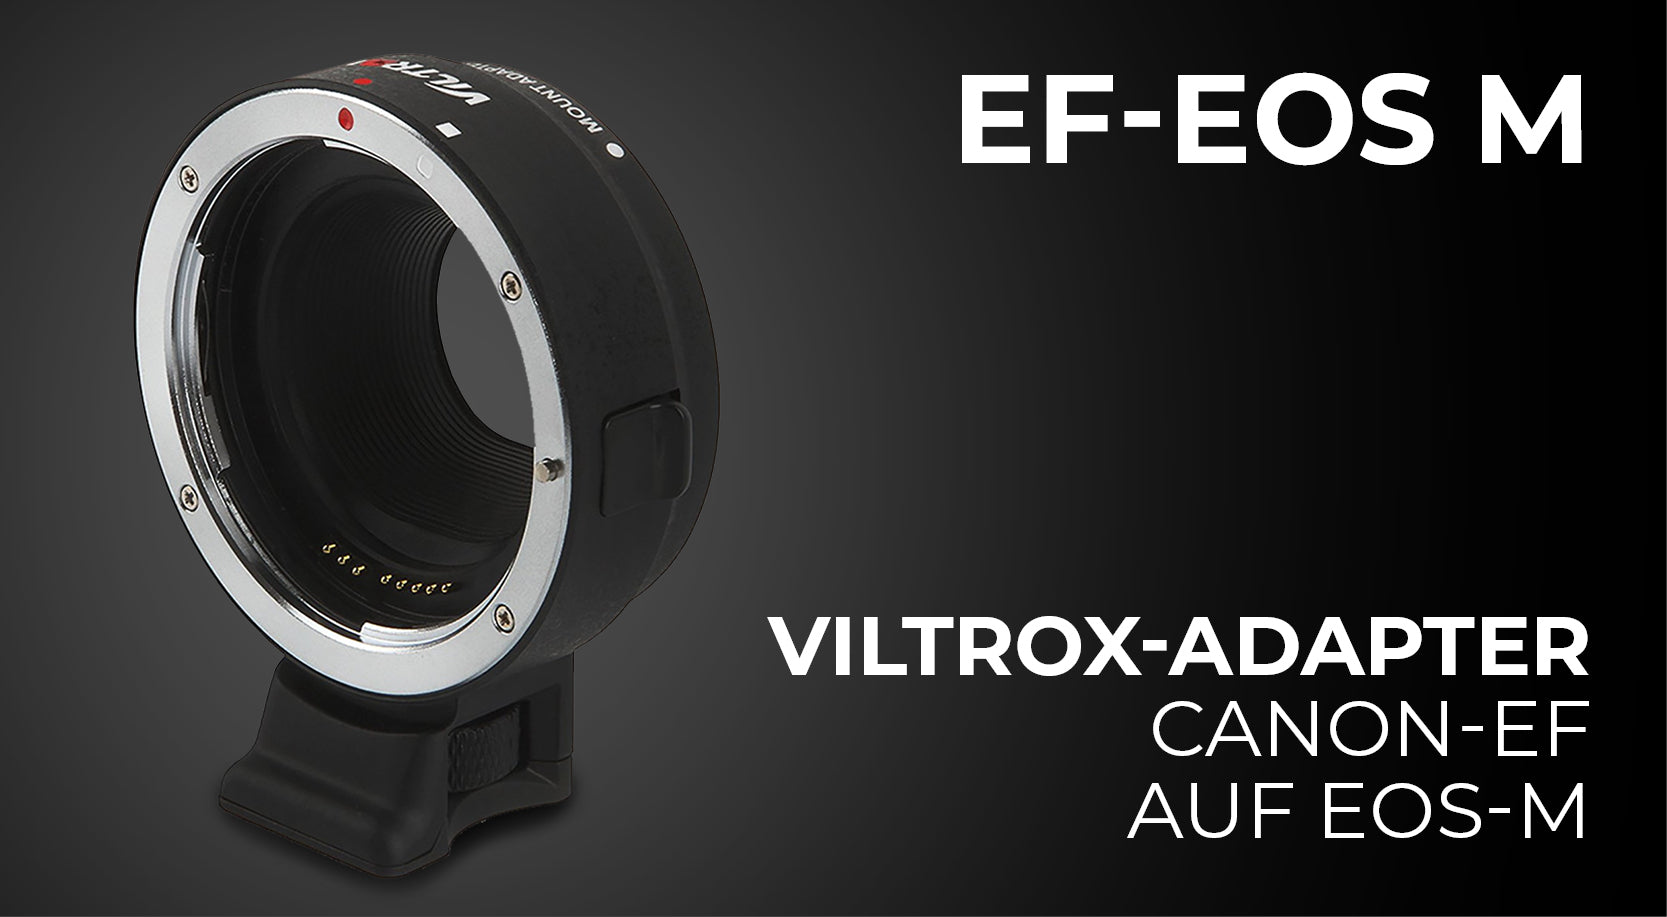 Viltrox adapter EF-EOS M for Canon EF lenses on EOS-M cameras